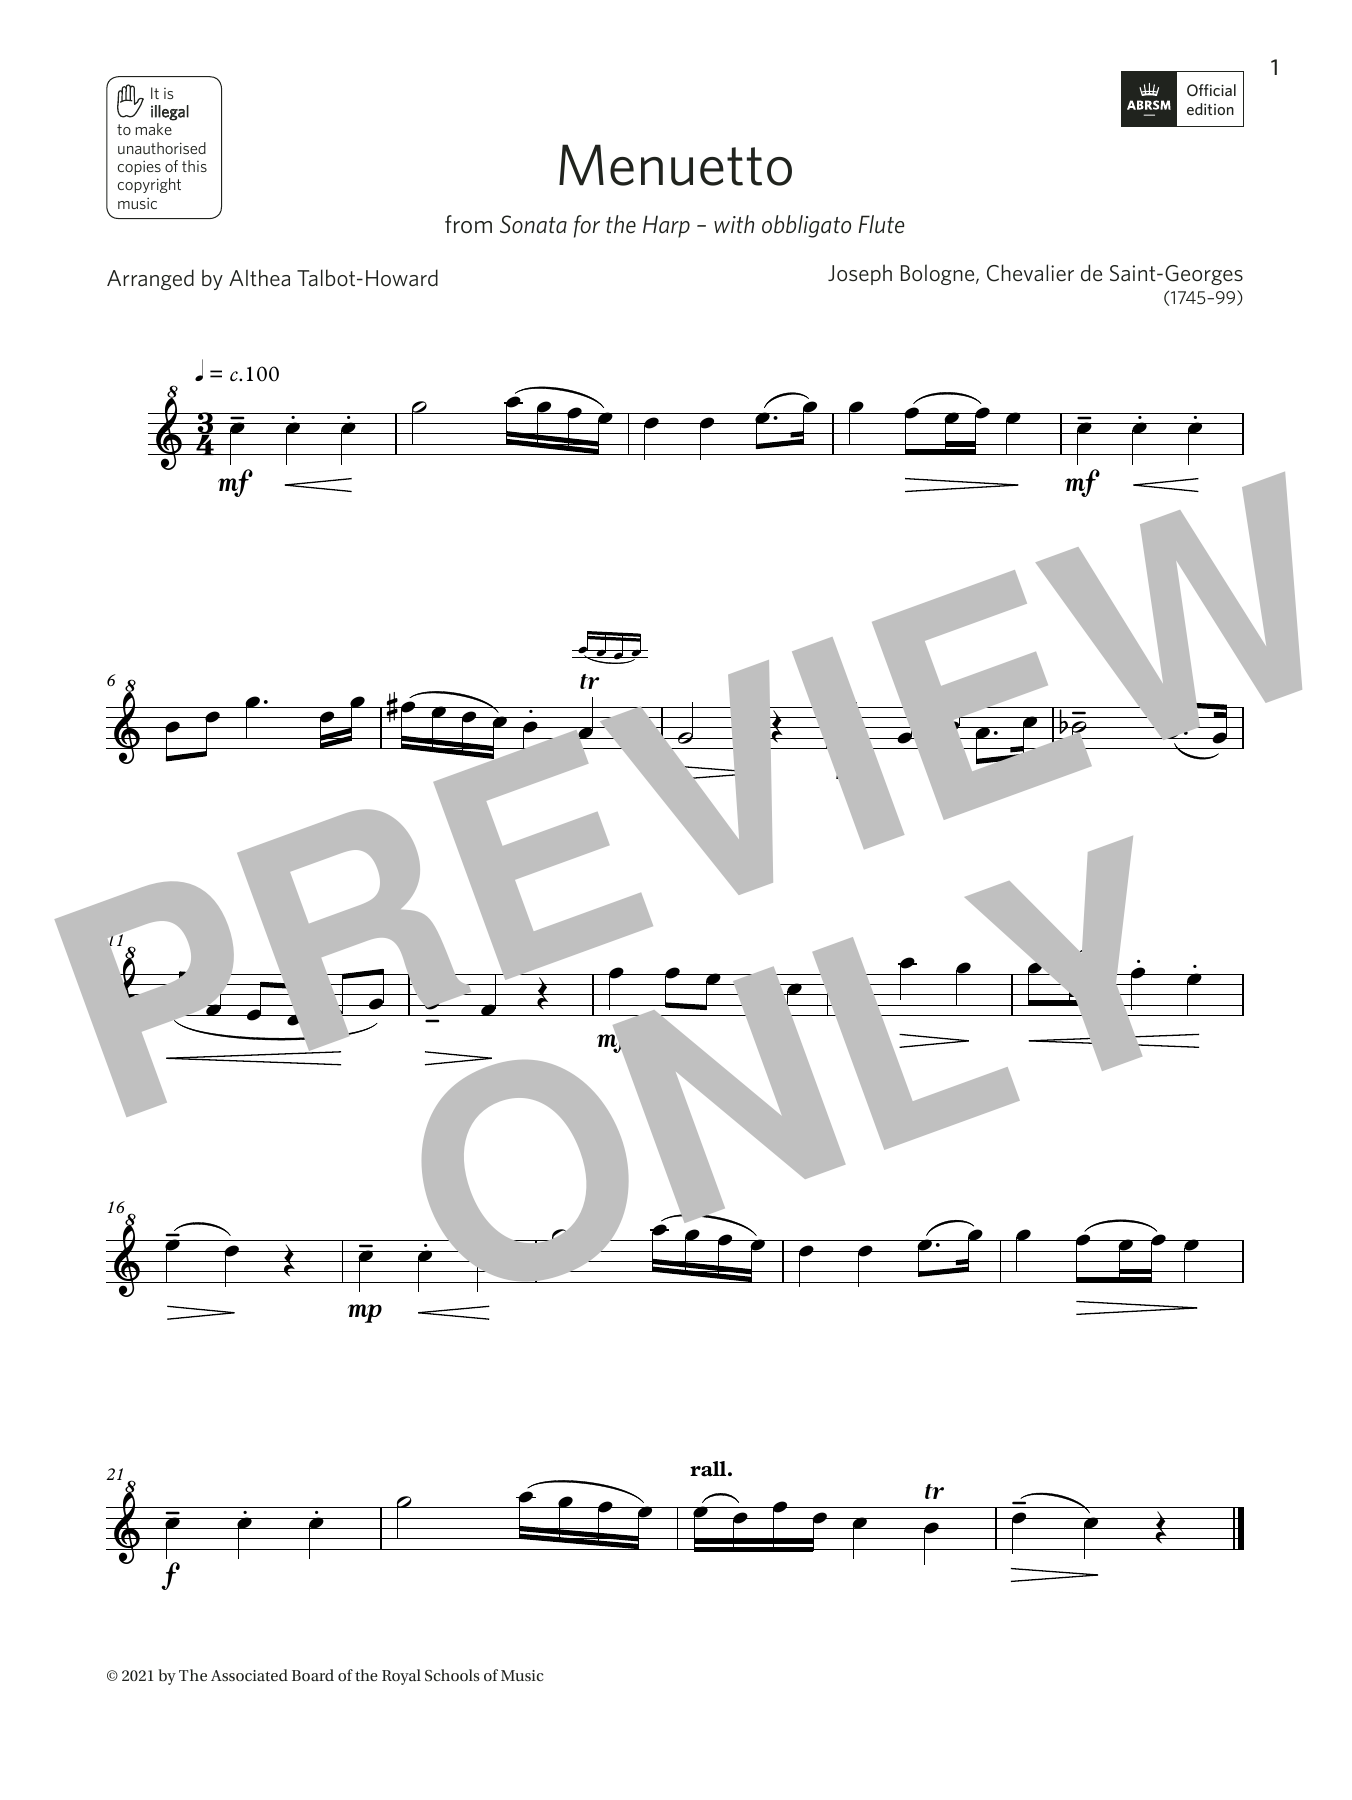 Download Althea Talbot-Howard Menuetto from Sonata for the Harp (Grad Sheet Music